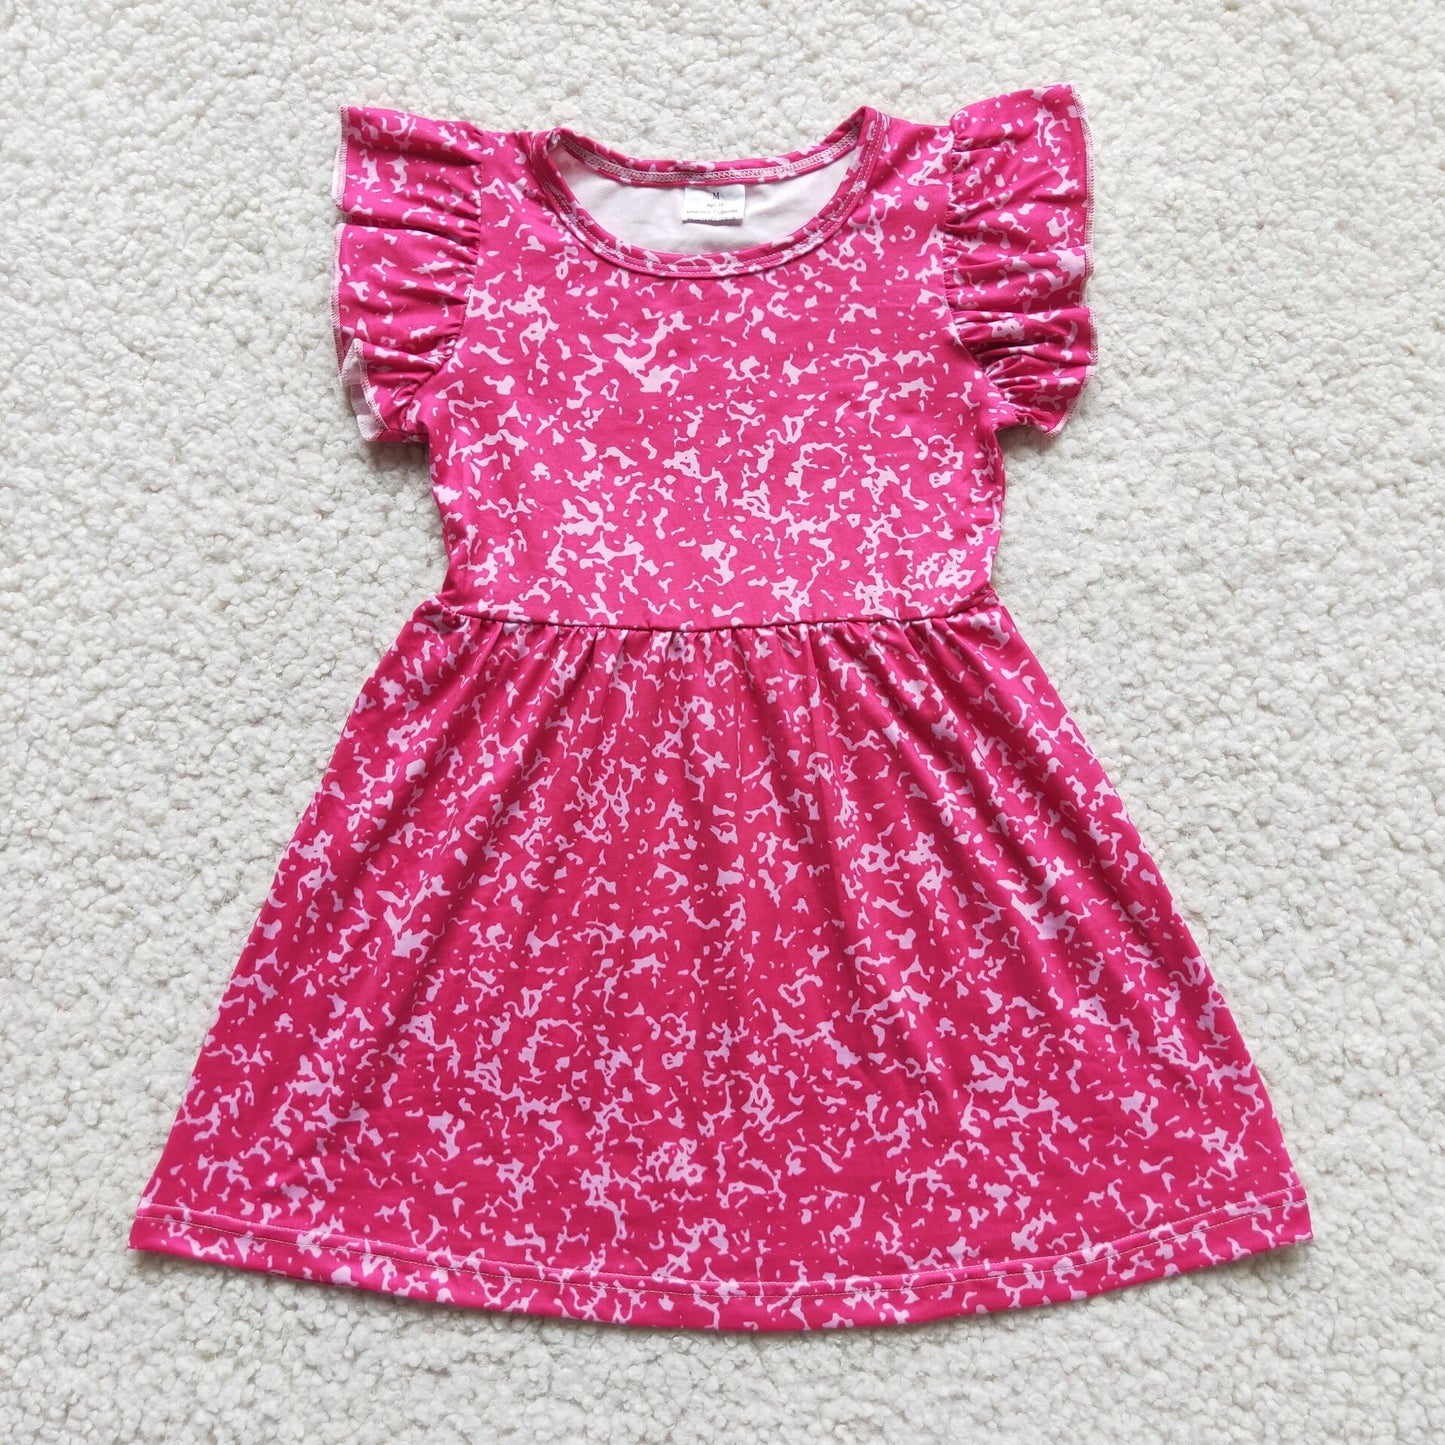 Baby girls hotpink floral pearl dresses